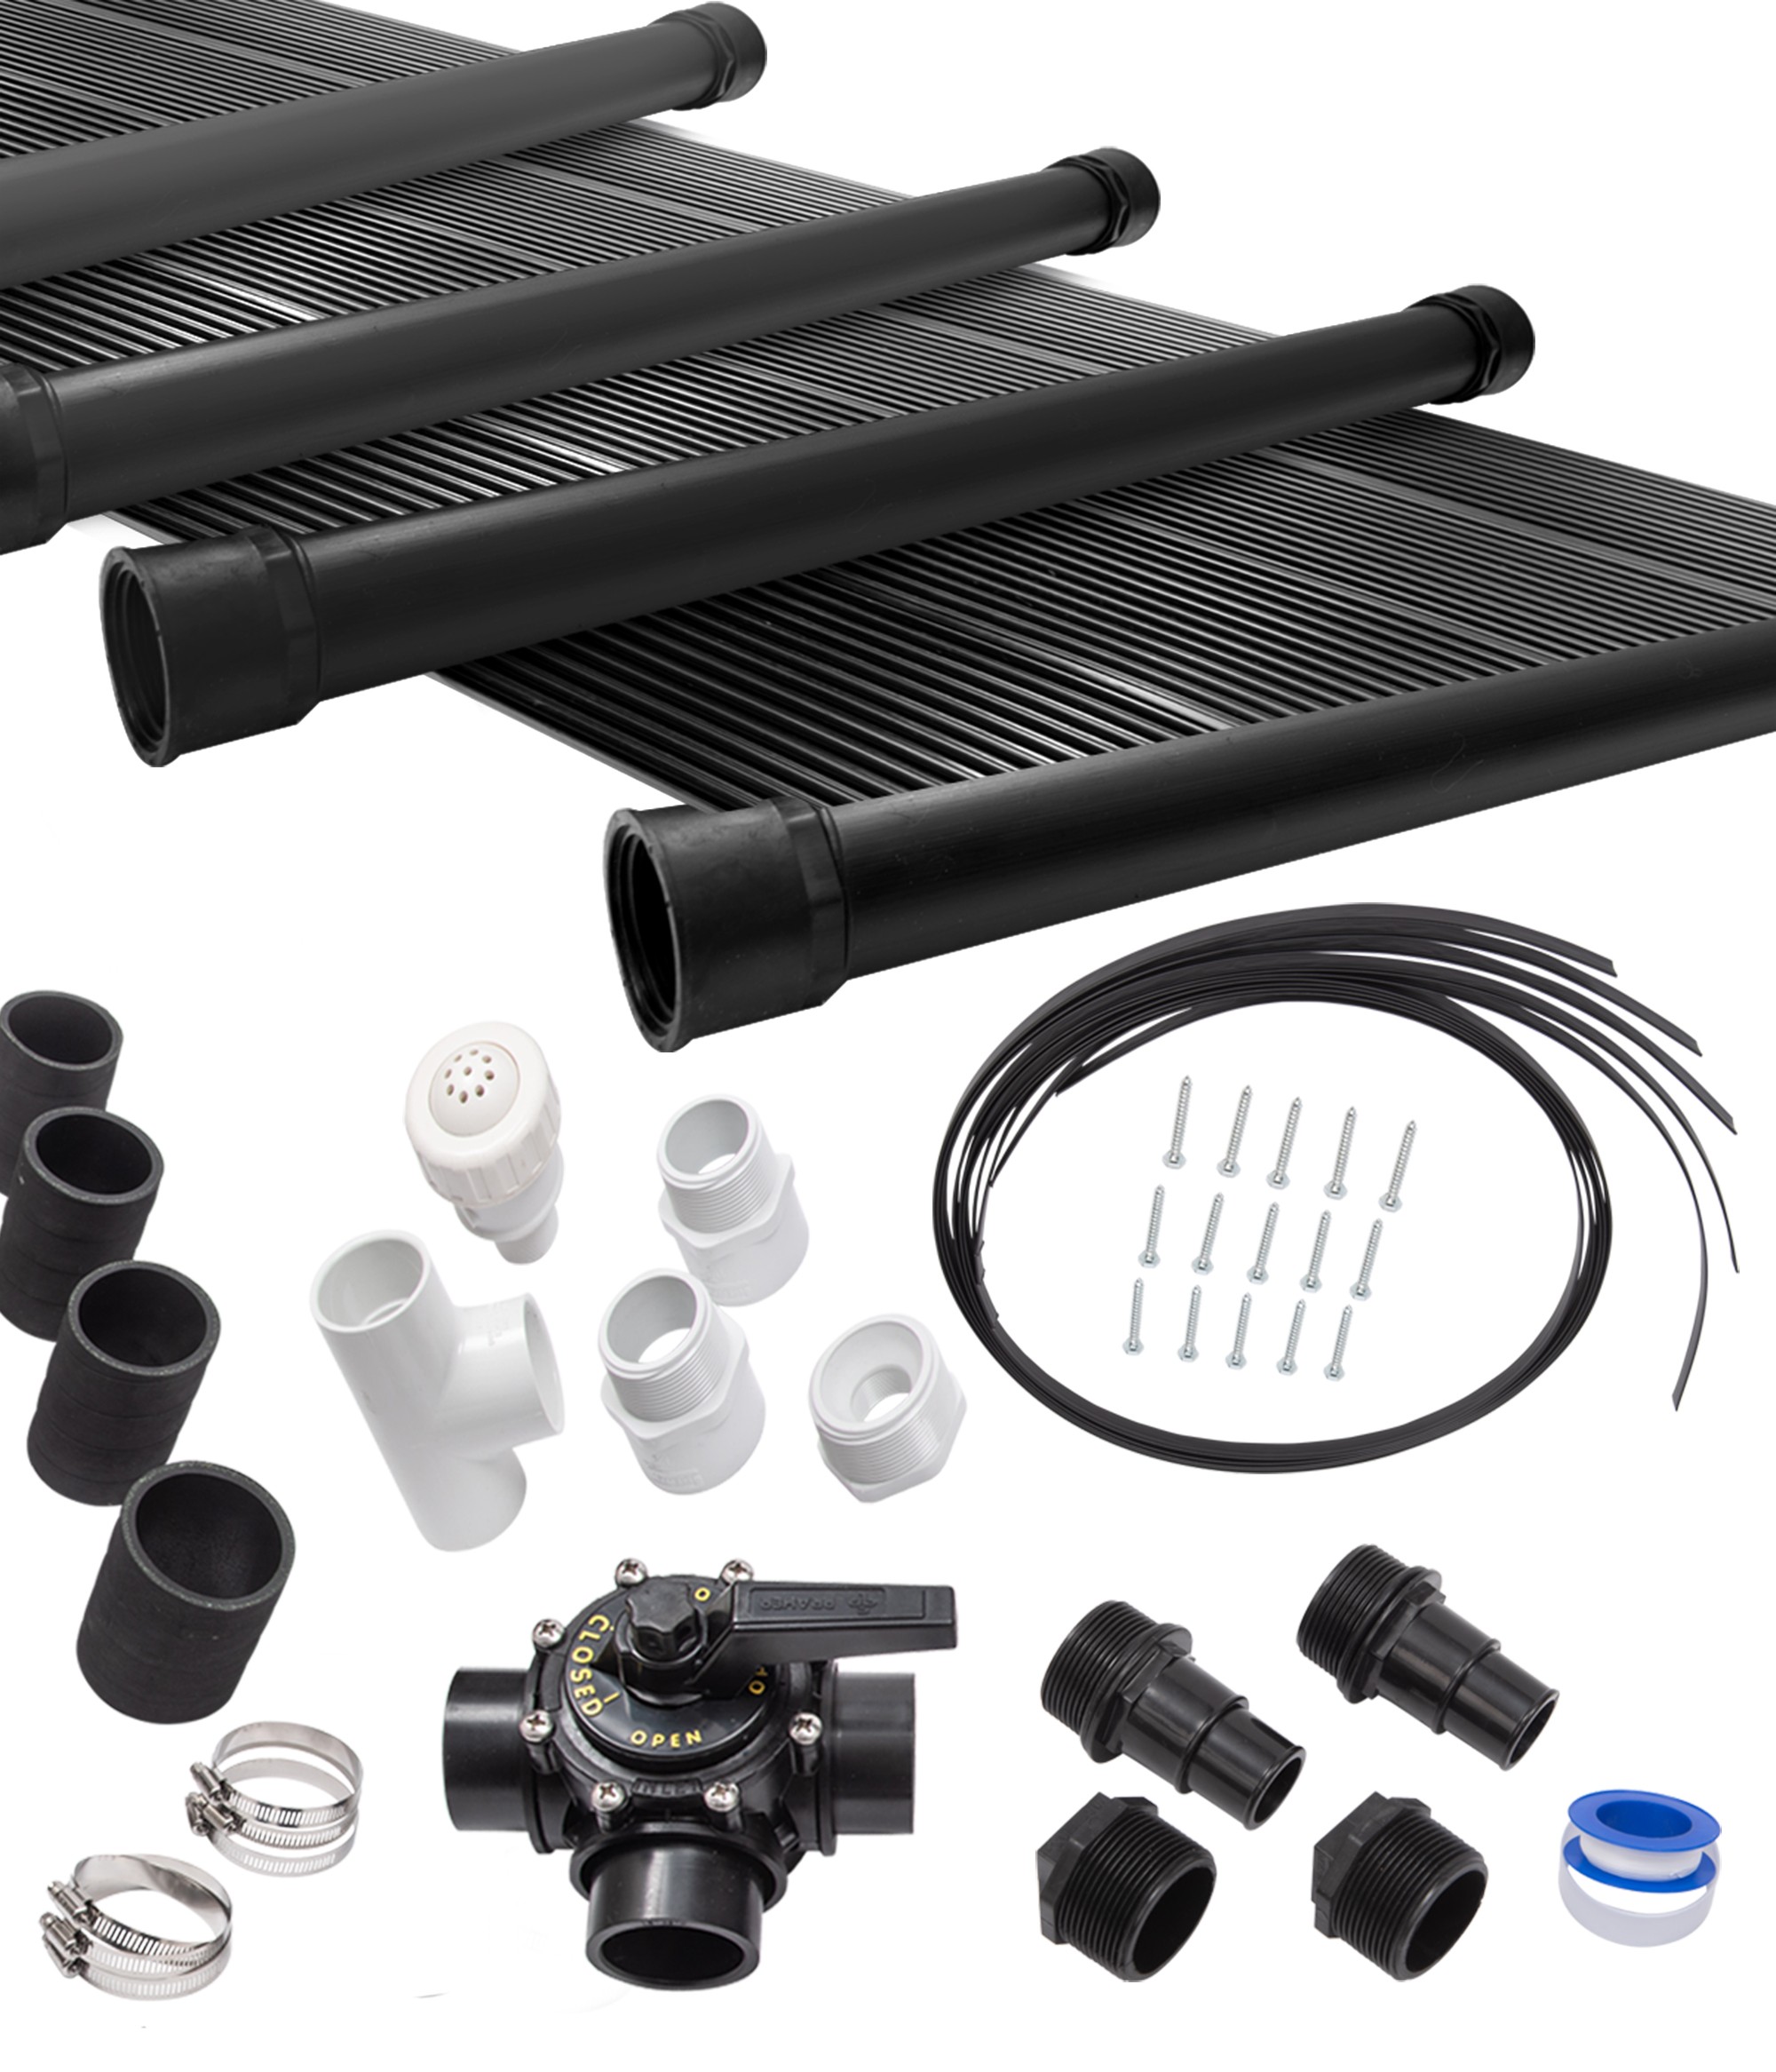 16-2X12' SunQuest Solar Swimming Pool Heater Complete System with Roof Kits